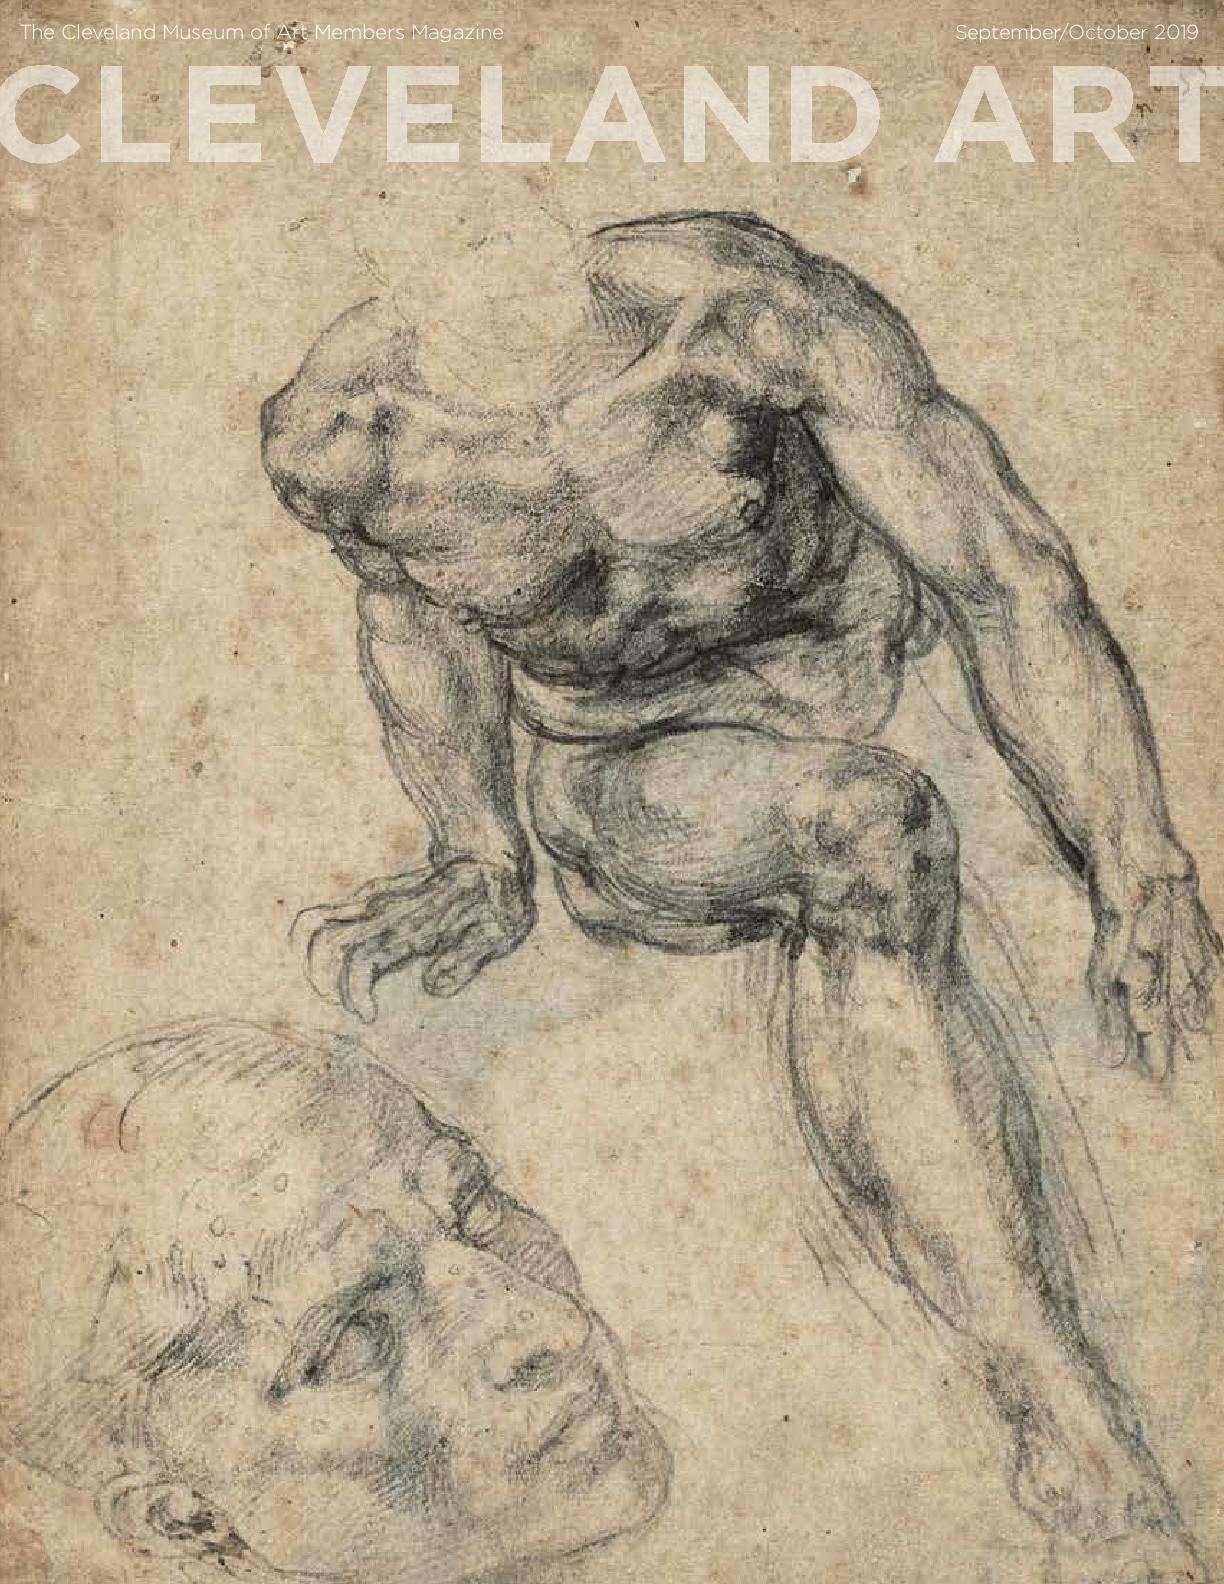 Cleveland Art magazine cover with drawing of a head and a headless body by Michelangelo